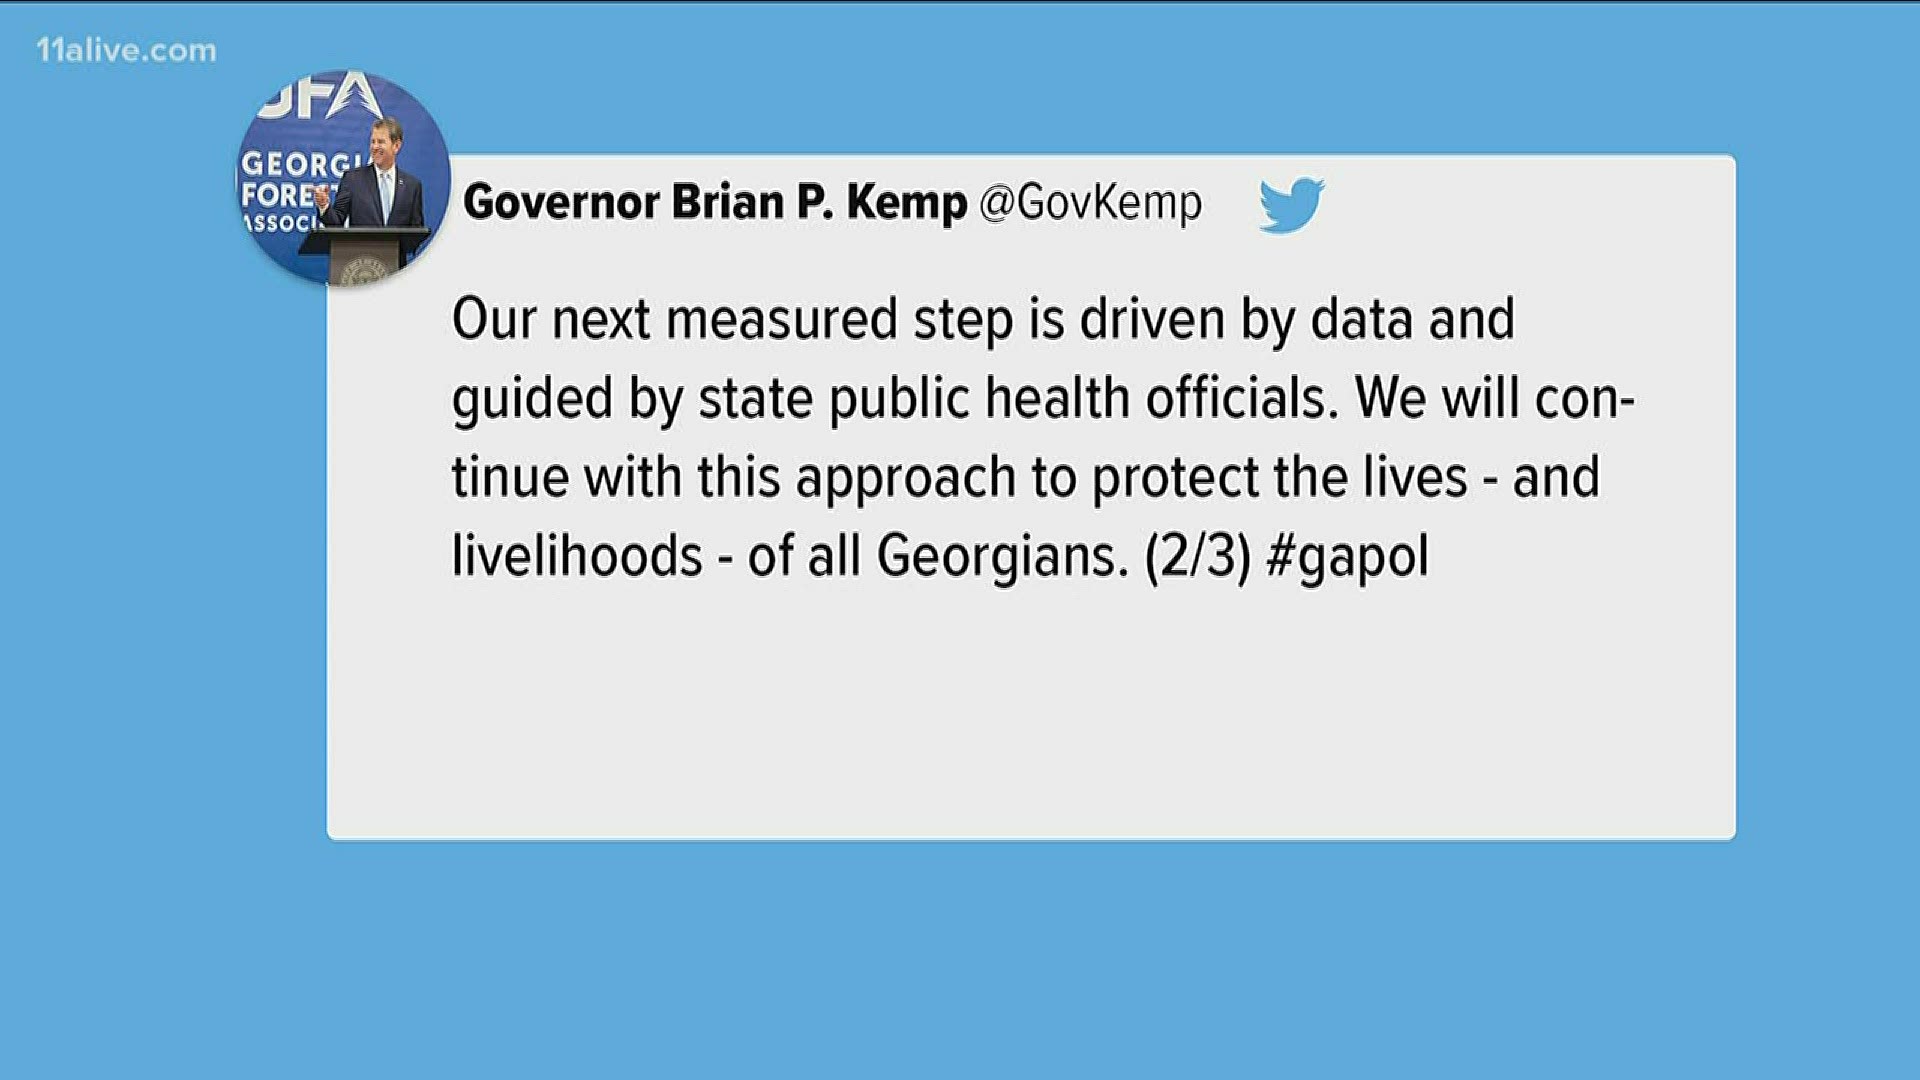 Gov. Kemp made the comments on Twitter after President Trump said he disagreed with his decision to reopen certain business.